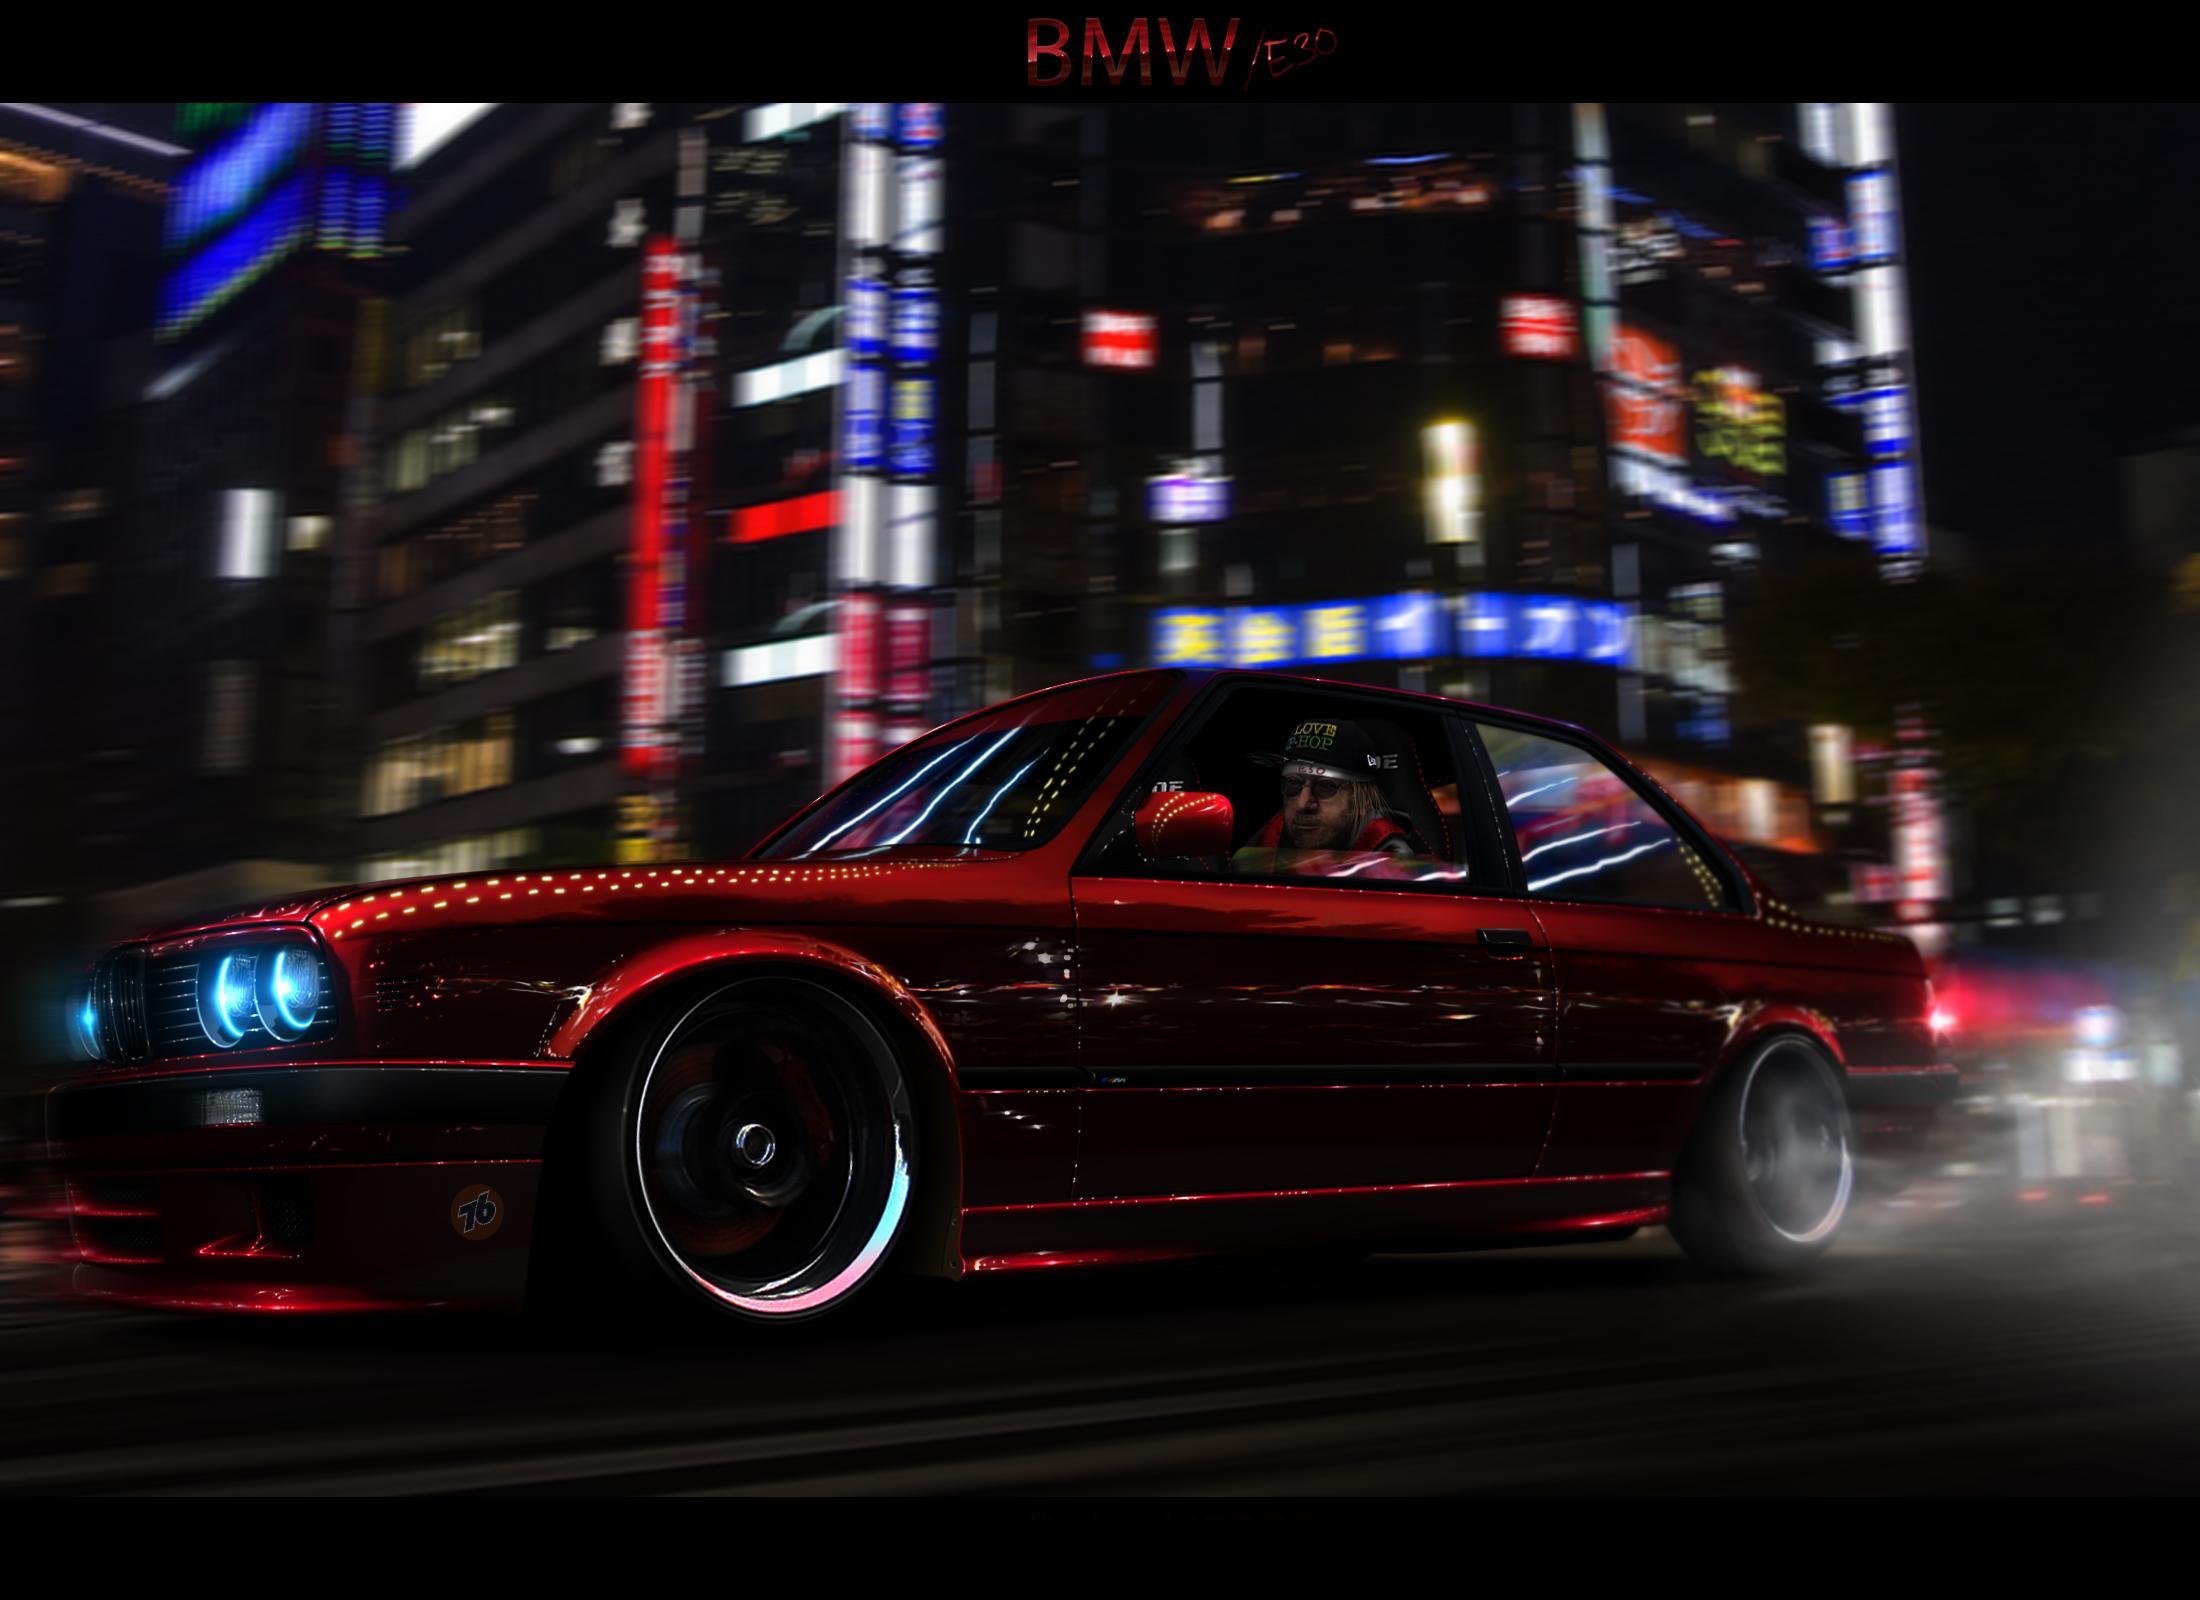 Bmw e30 - (#46792) - High Quality and Resolution Wallpapers on ...